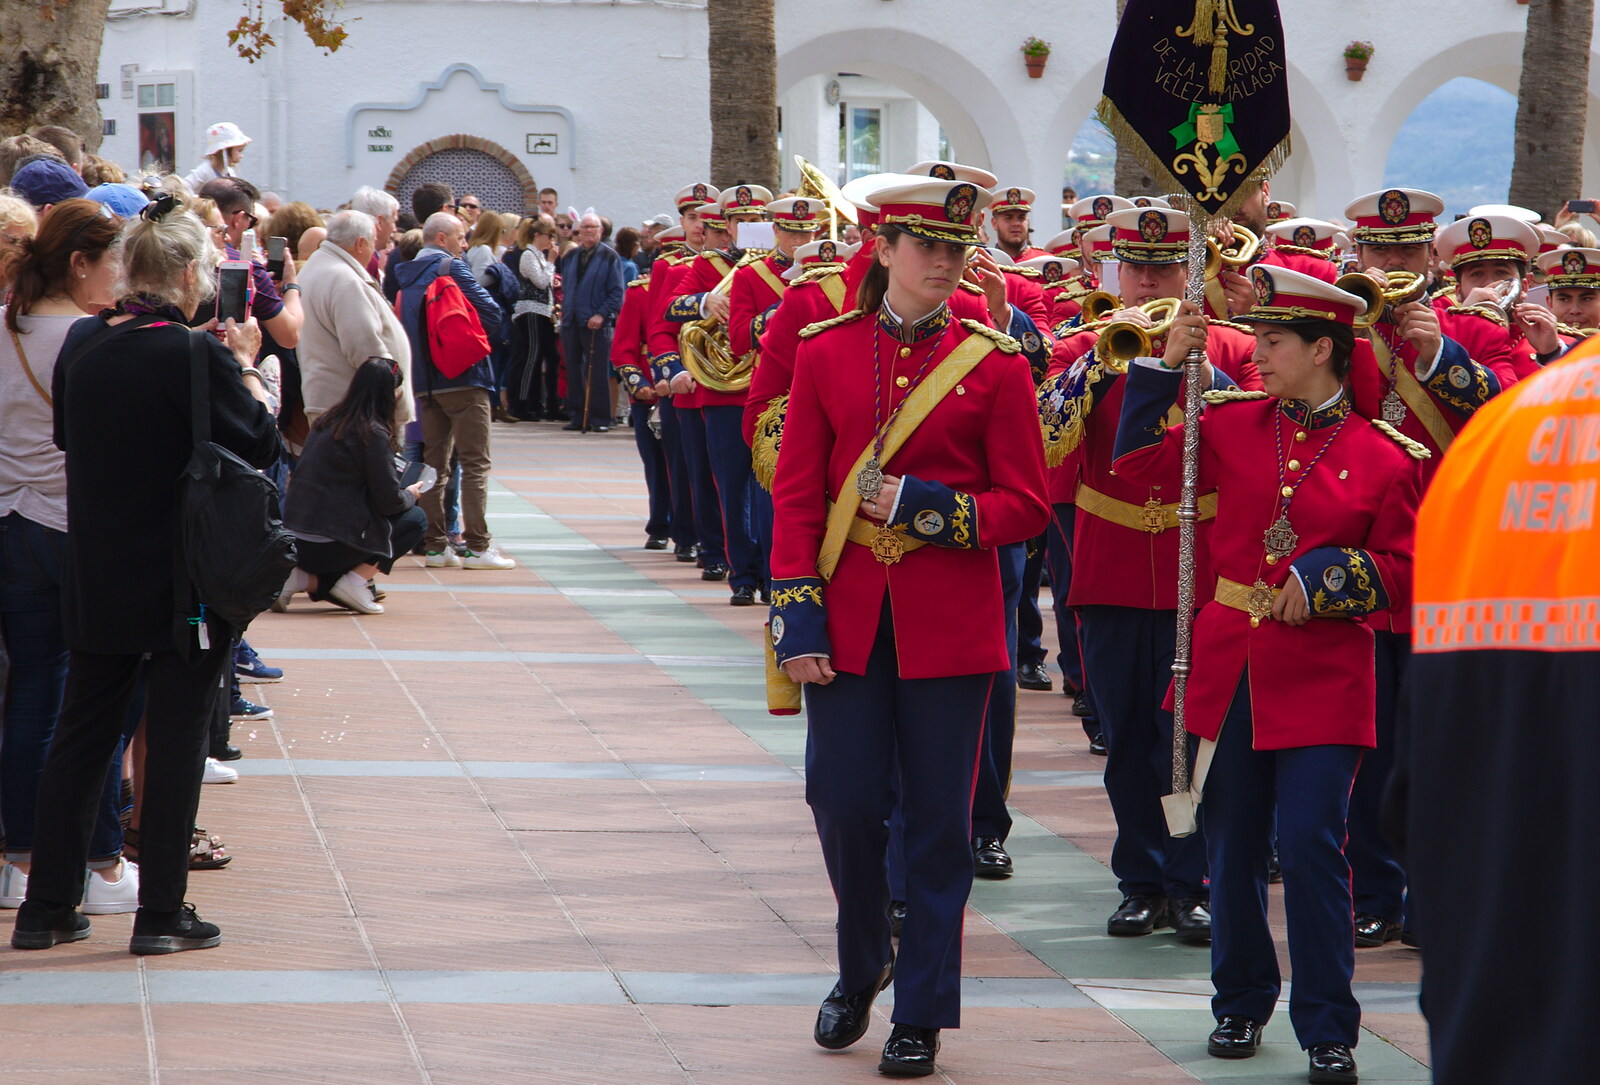 Outside, another band appears from An Easter Parade, Nerja, Andalusia, Spain - 21st April 2019